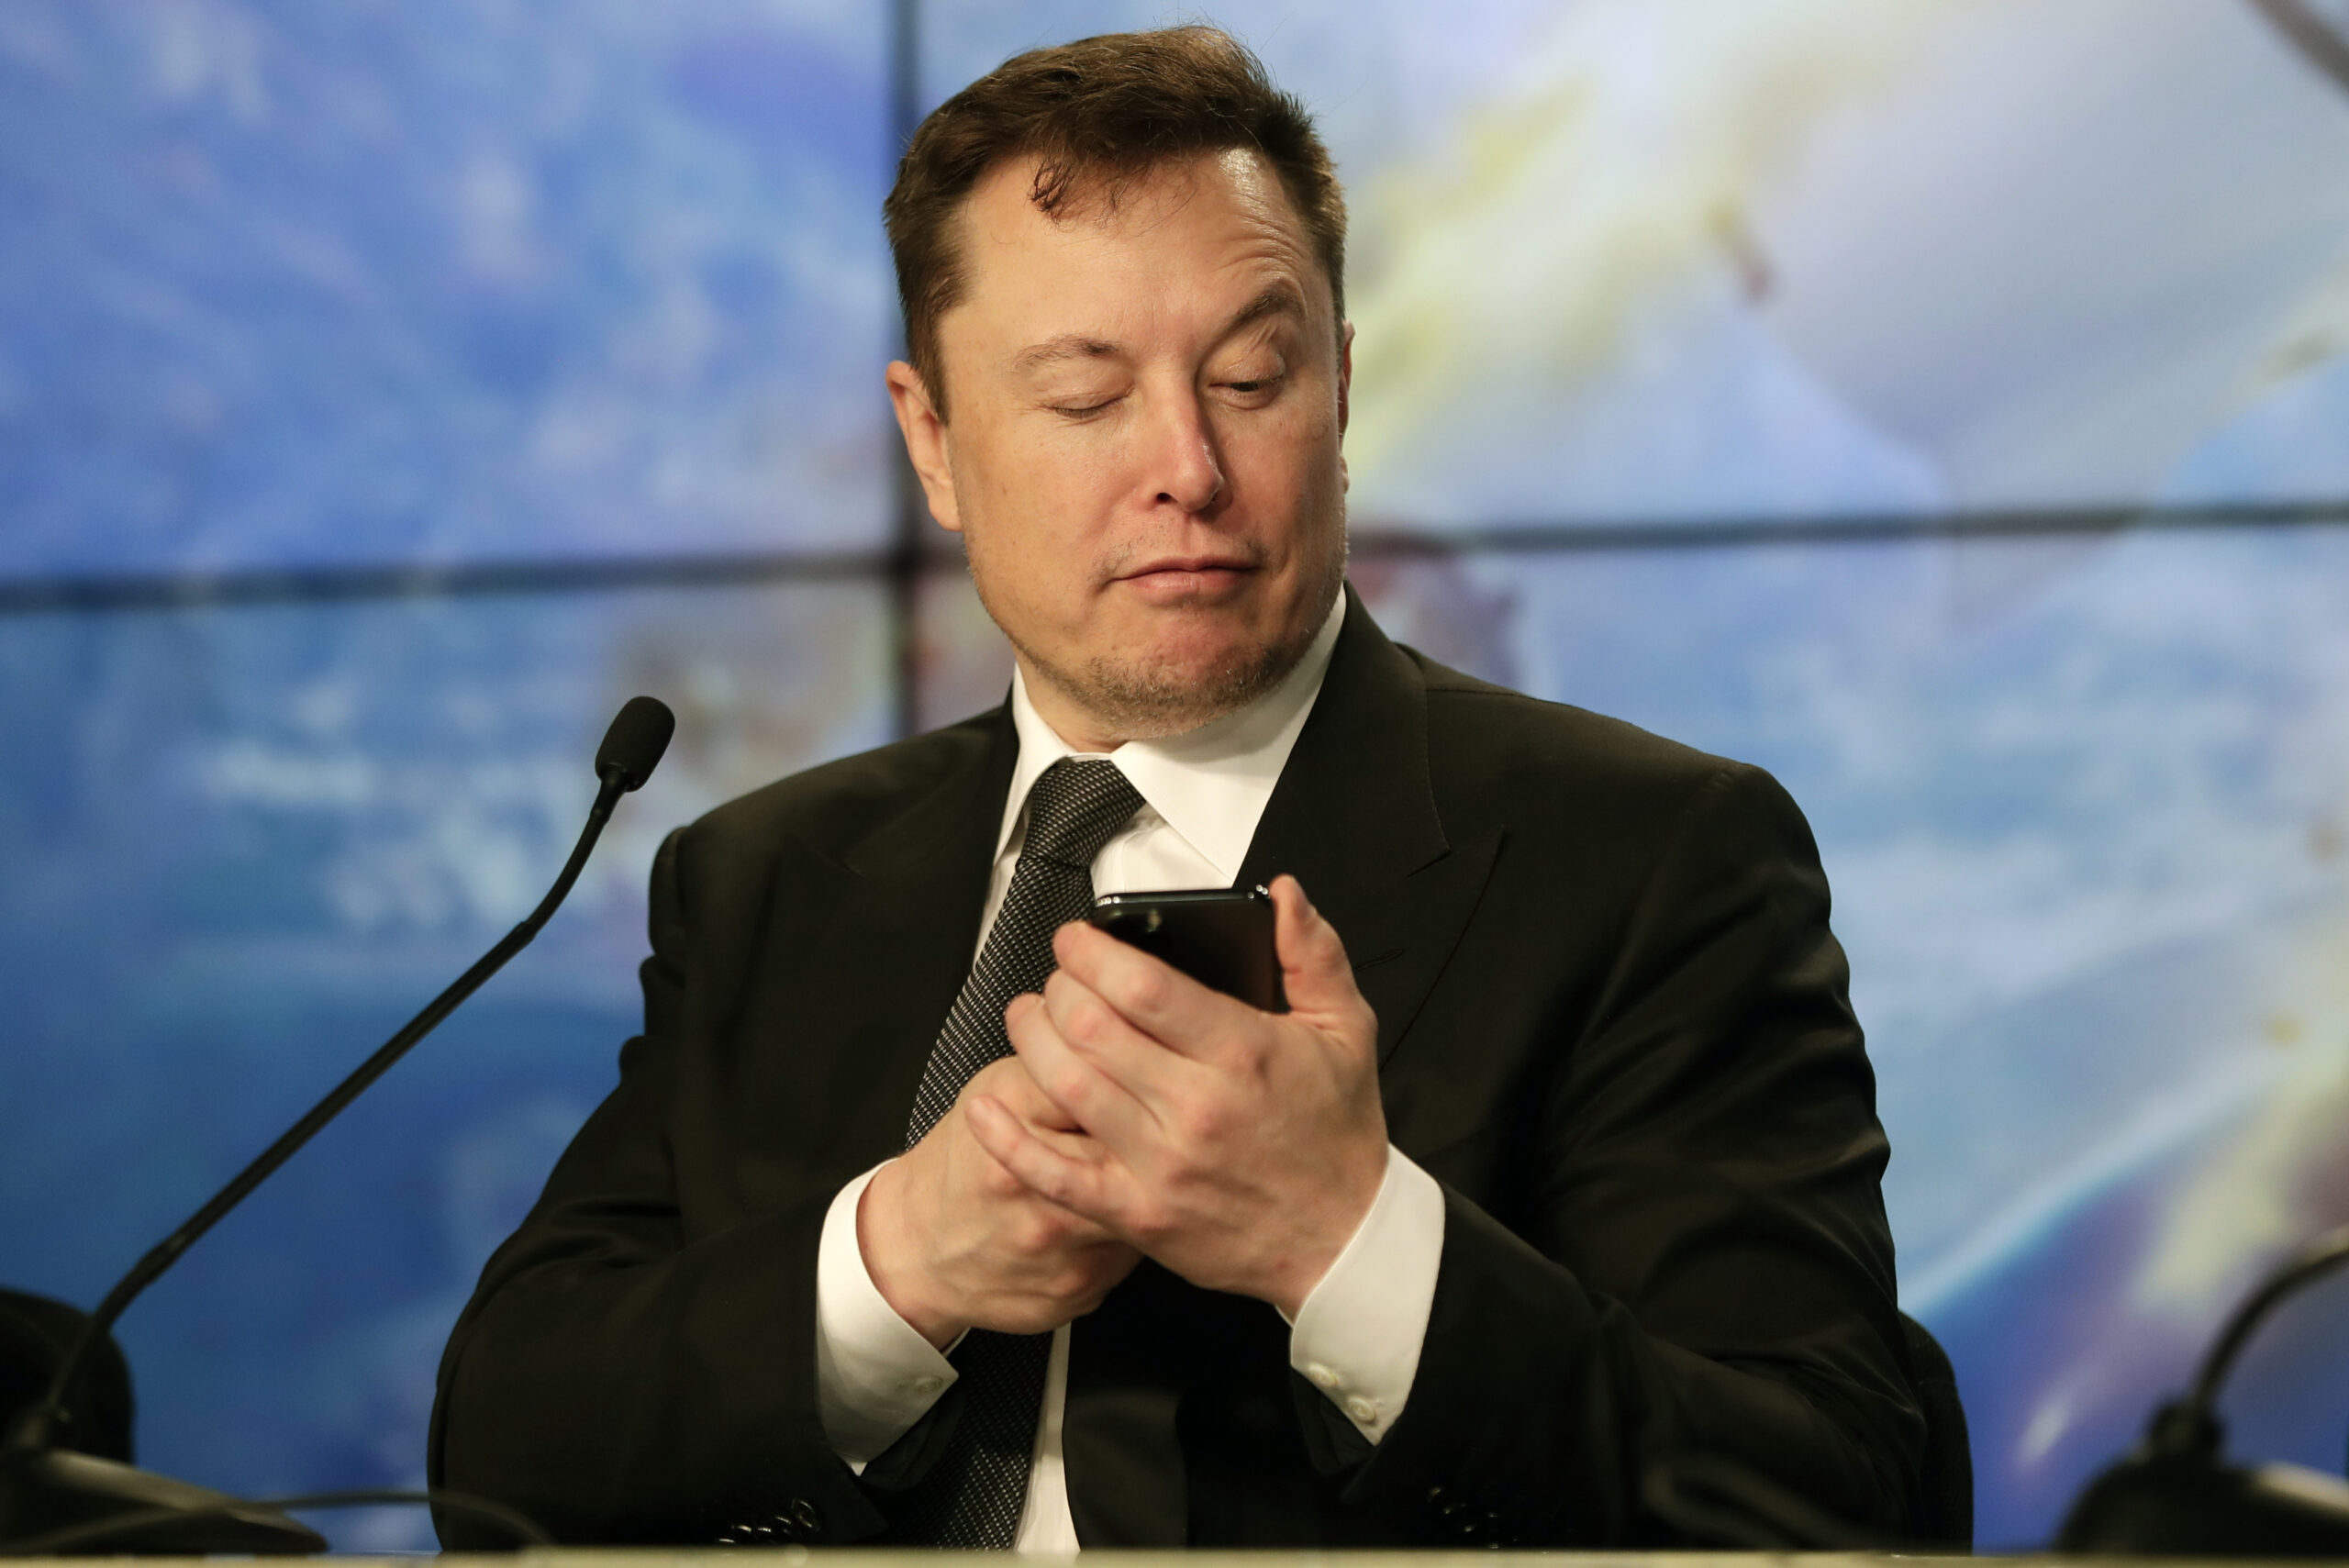 Elon Musk Comes Out Against Banning TikTok: ‘Not What America Stands For’